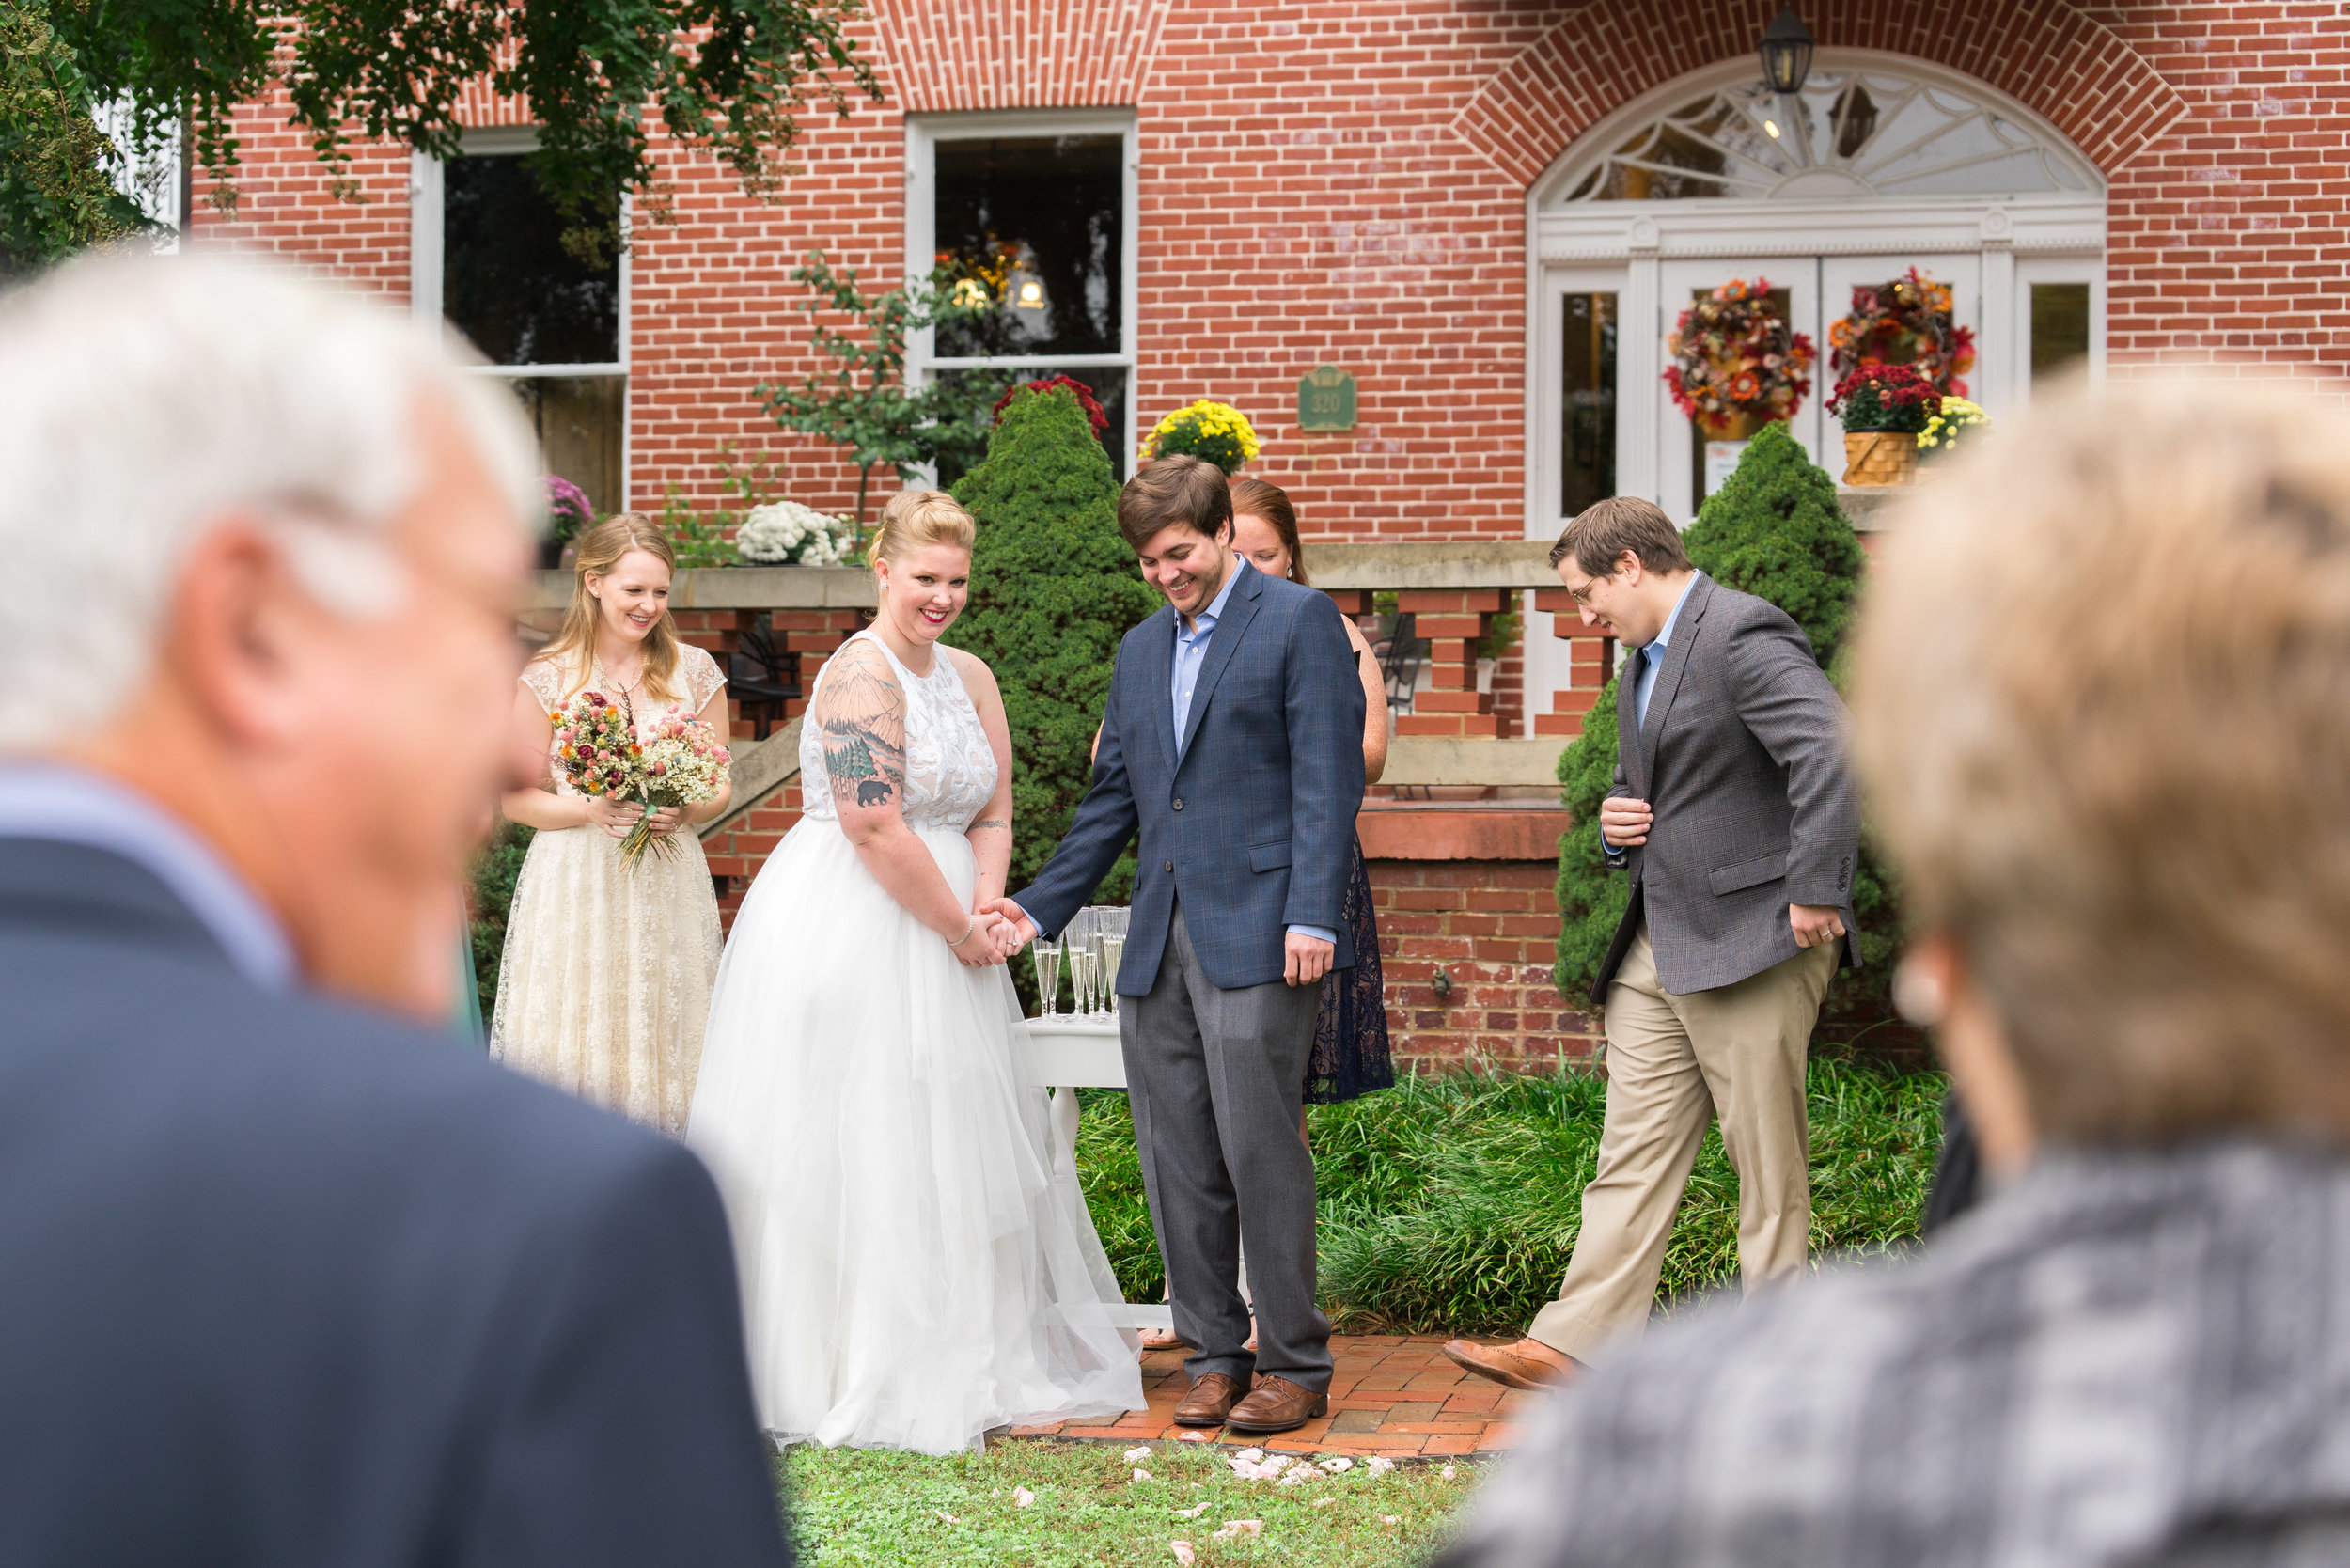 Rockville wedding venues for summer and fall